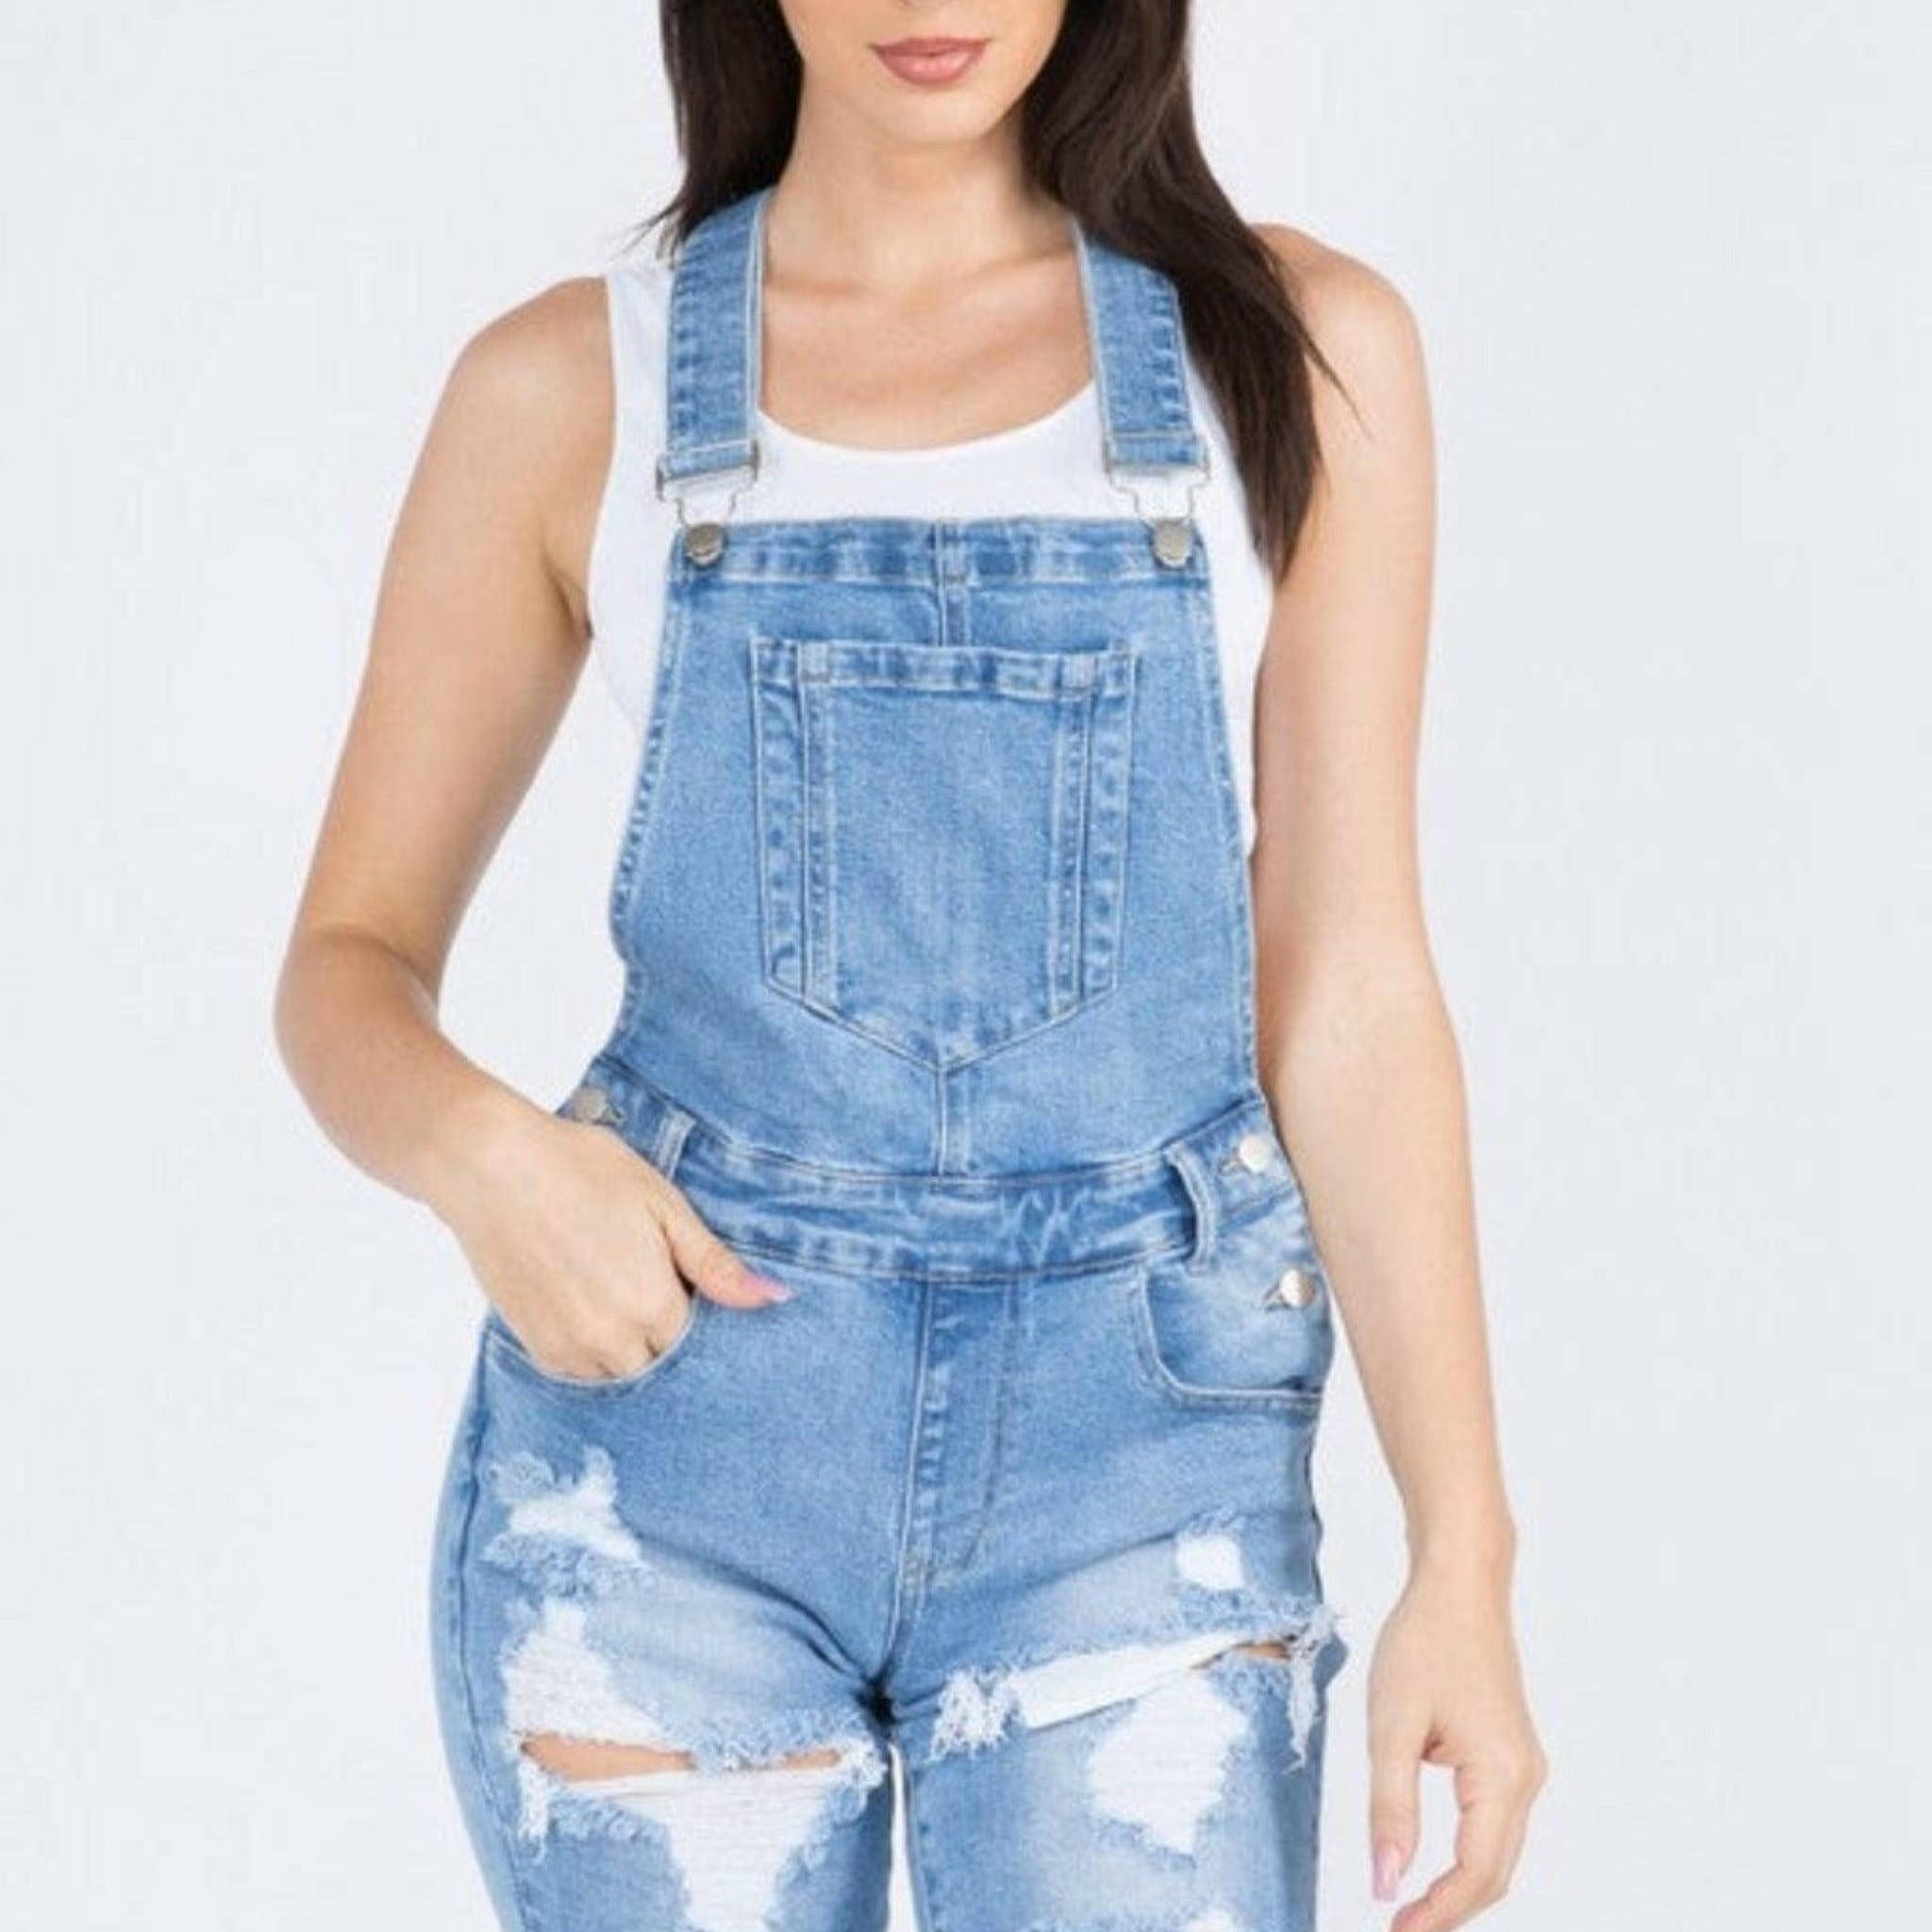 Epicplacess jumpsuits SMALL / BLUE / united states SOLID MID RISE SLIM FIT SHORT OVERALLS JUMPSUITS